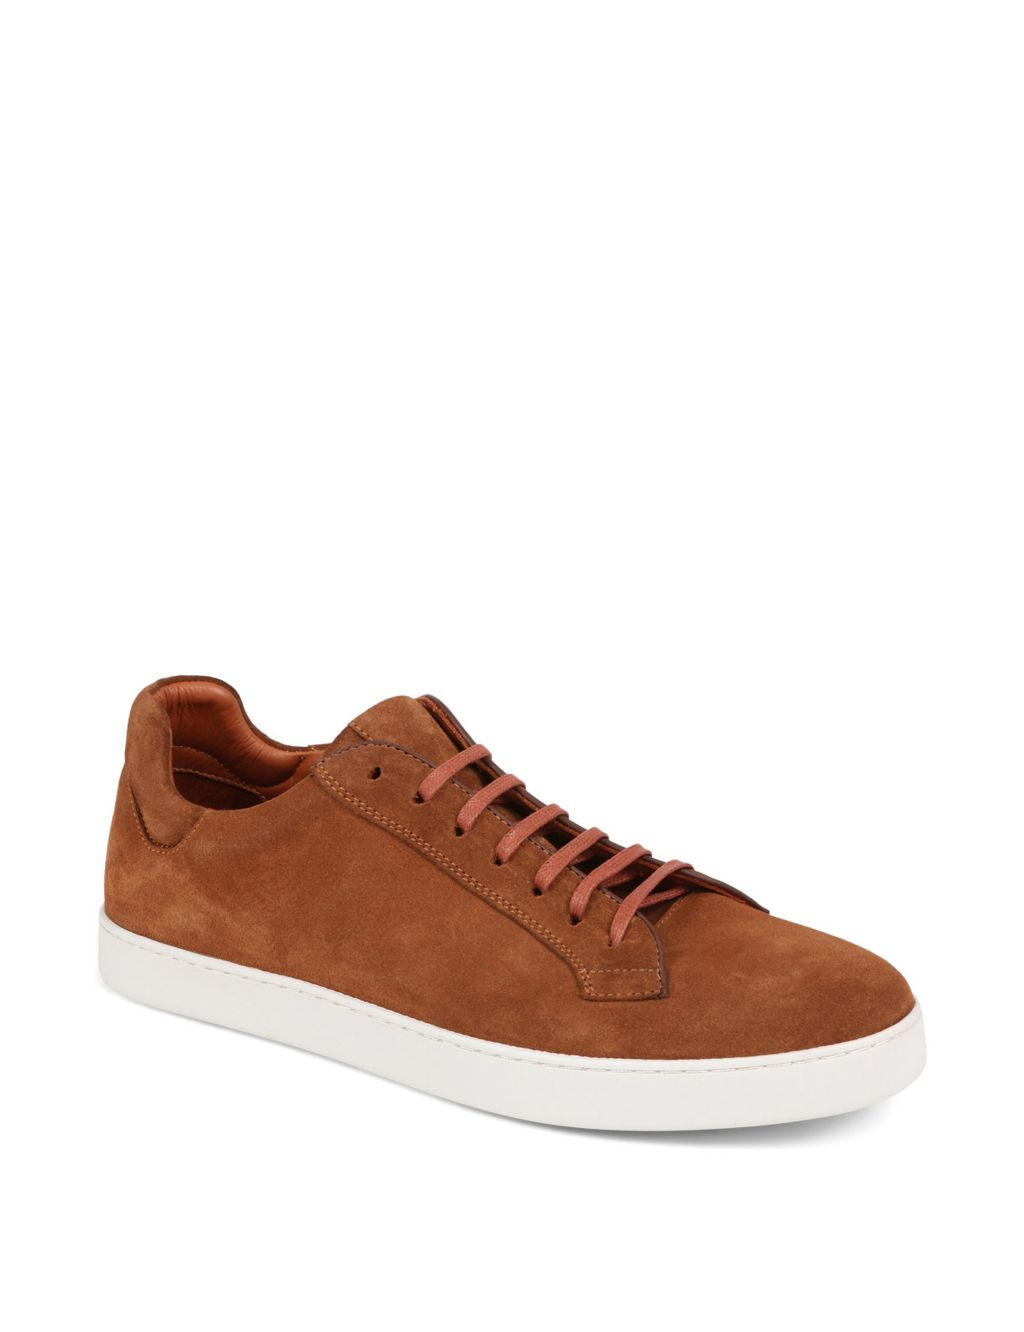 Suede Lace Up Trainers image 3